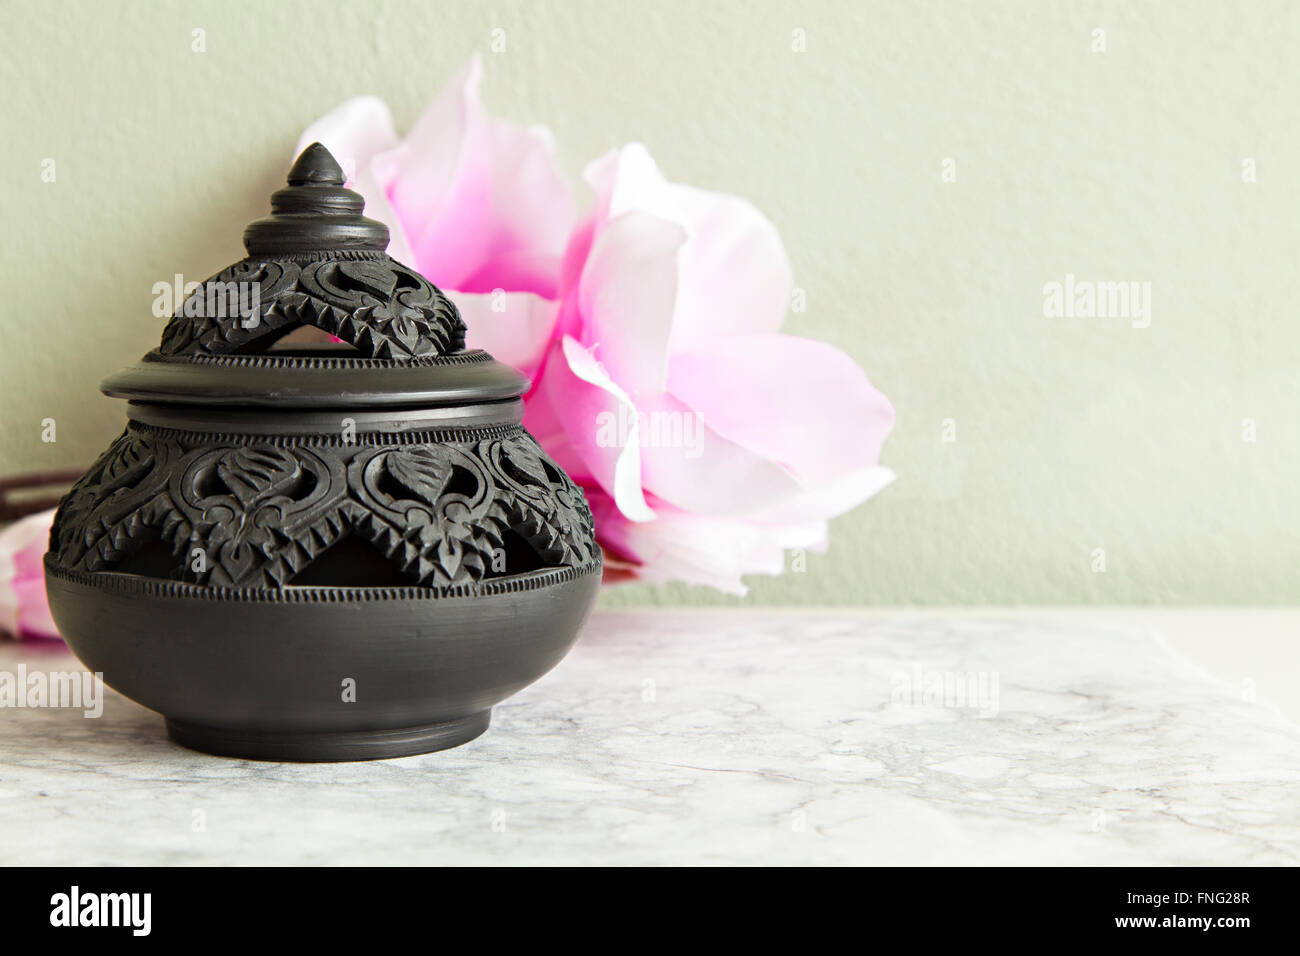 Image of a traditional clay pot from Thailand, with decorative carvings. Stock Photo